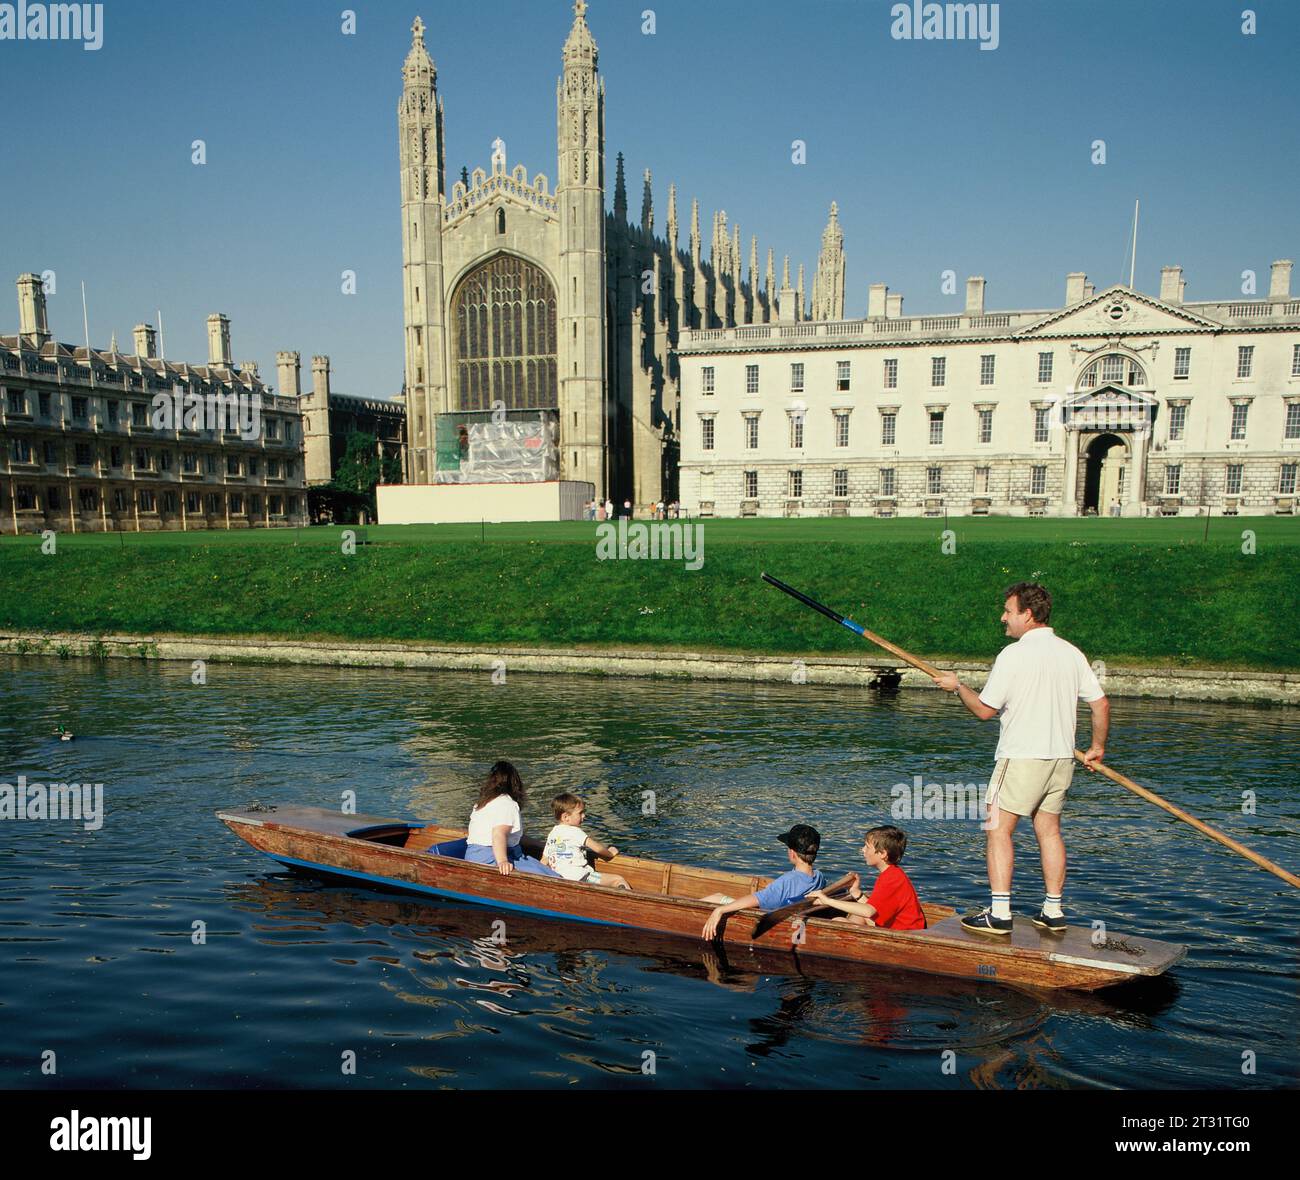 England. Cambridge. The Backs. Punting on the river by King's College. Stock Photo